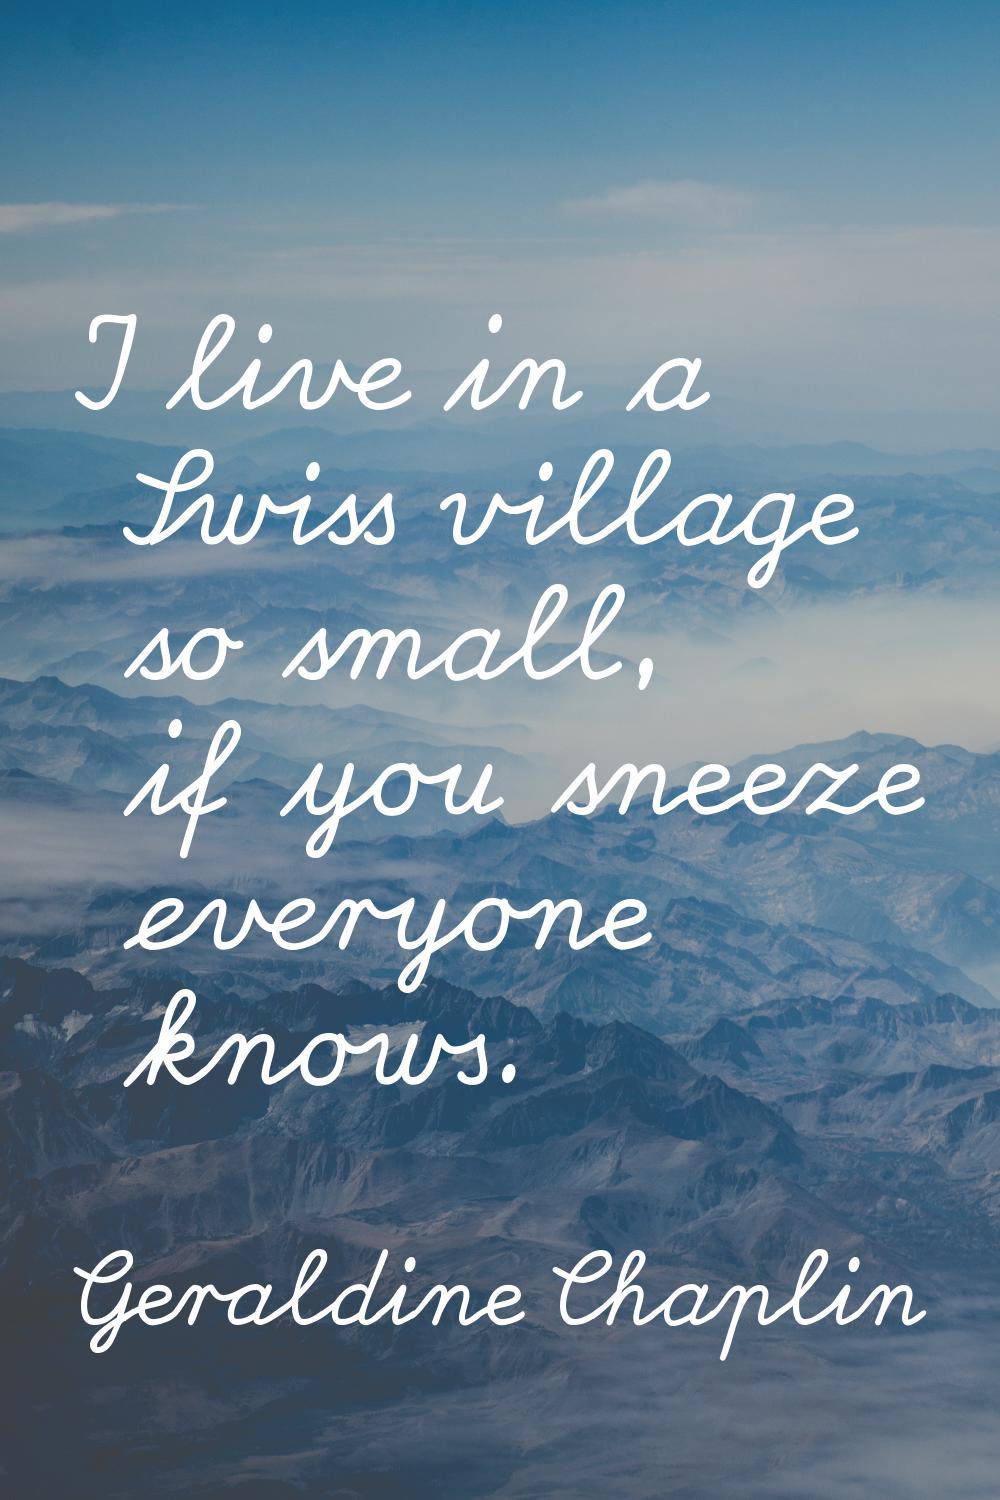 I live in a Swiss village so small, if you sneeze everyone knows.